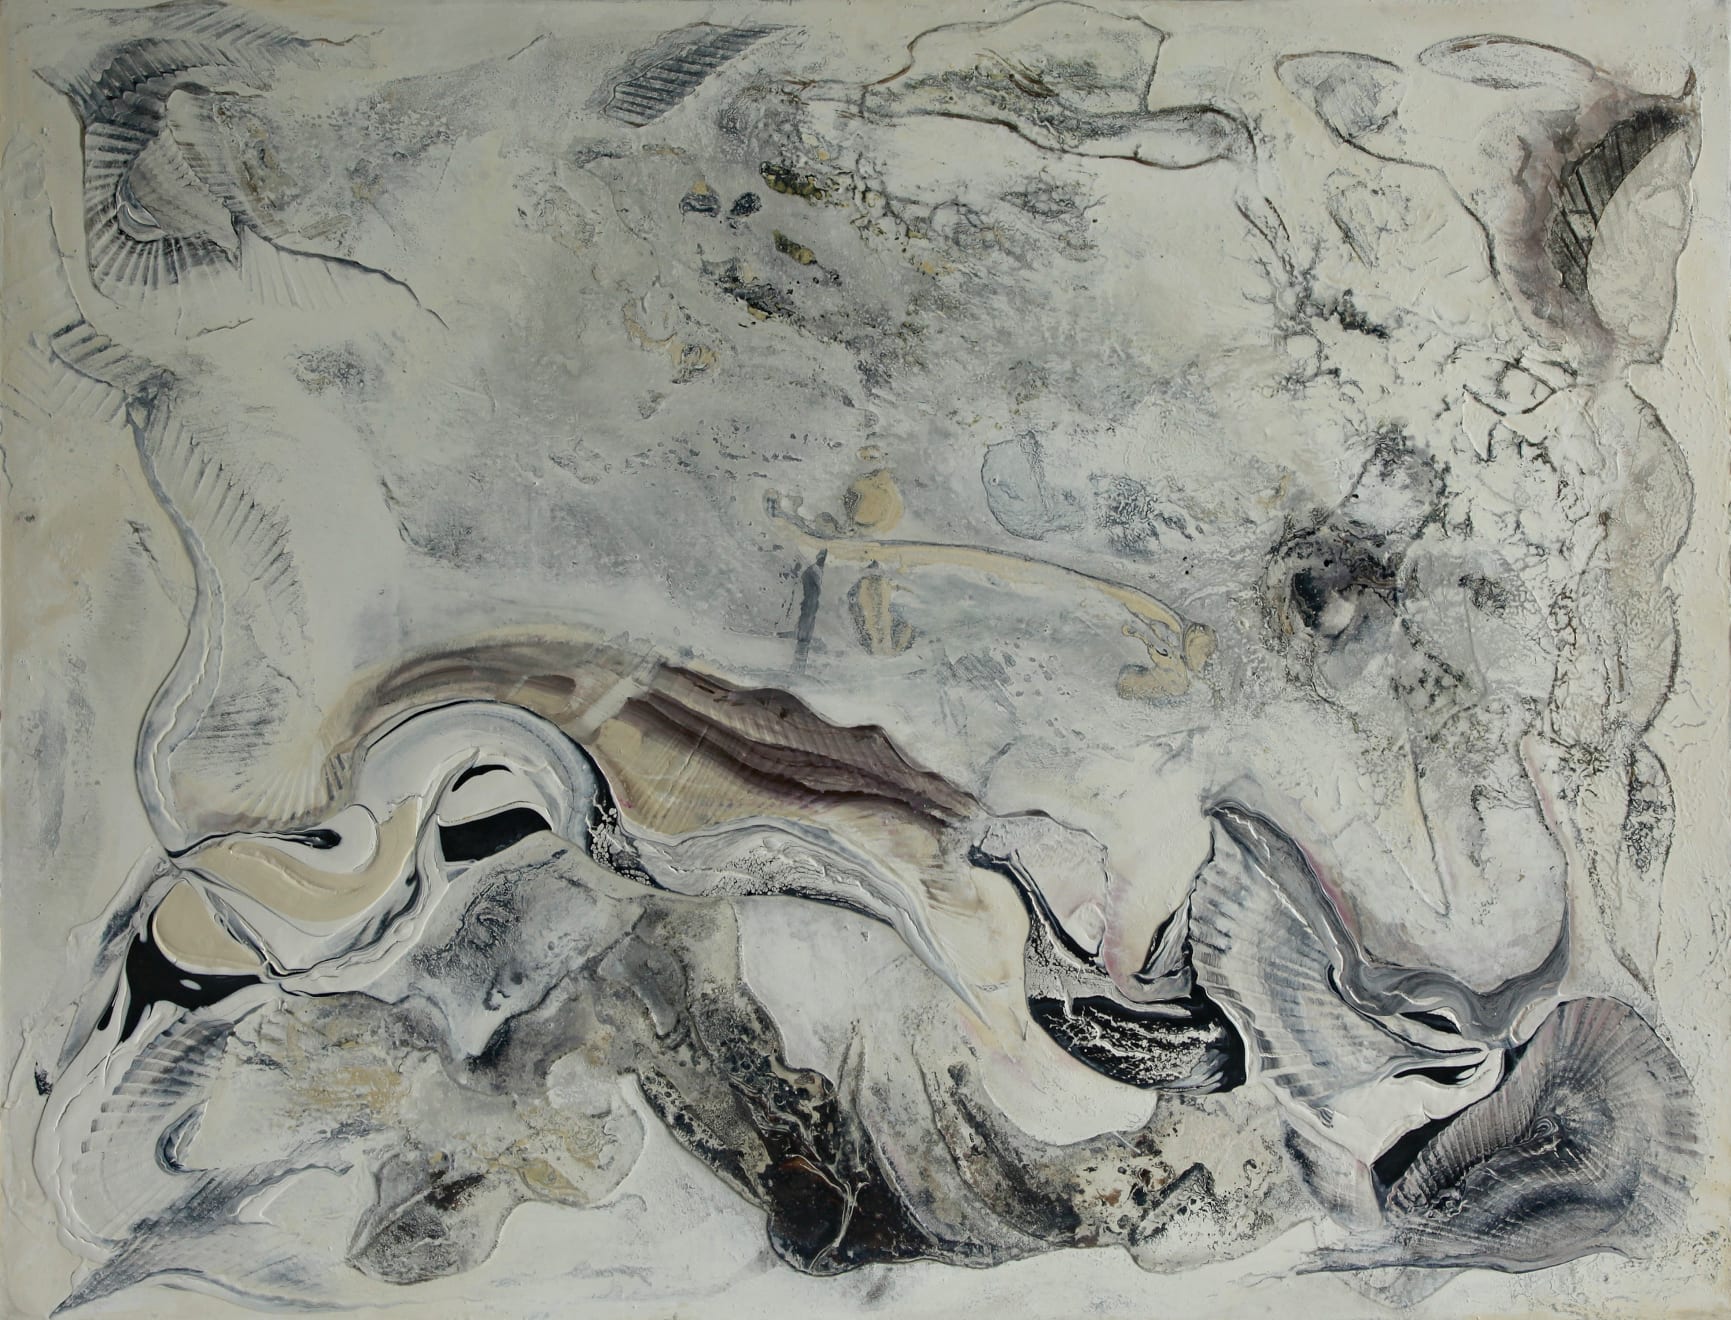 Sea Bed Oil and Acrylic on Linen Mounted Board 160 x 122cm AUD $6700 SOLD